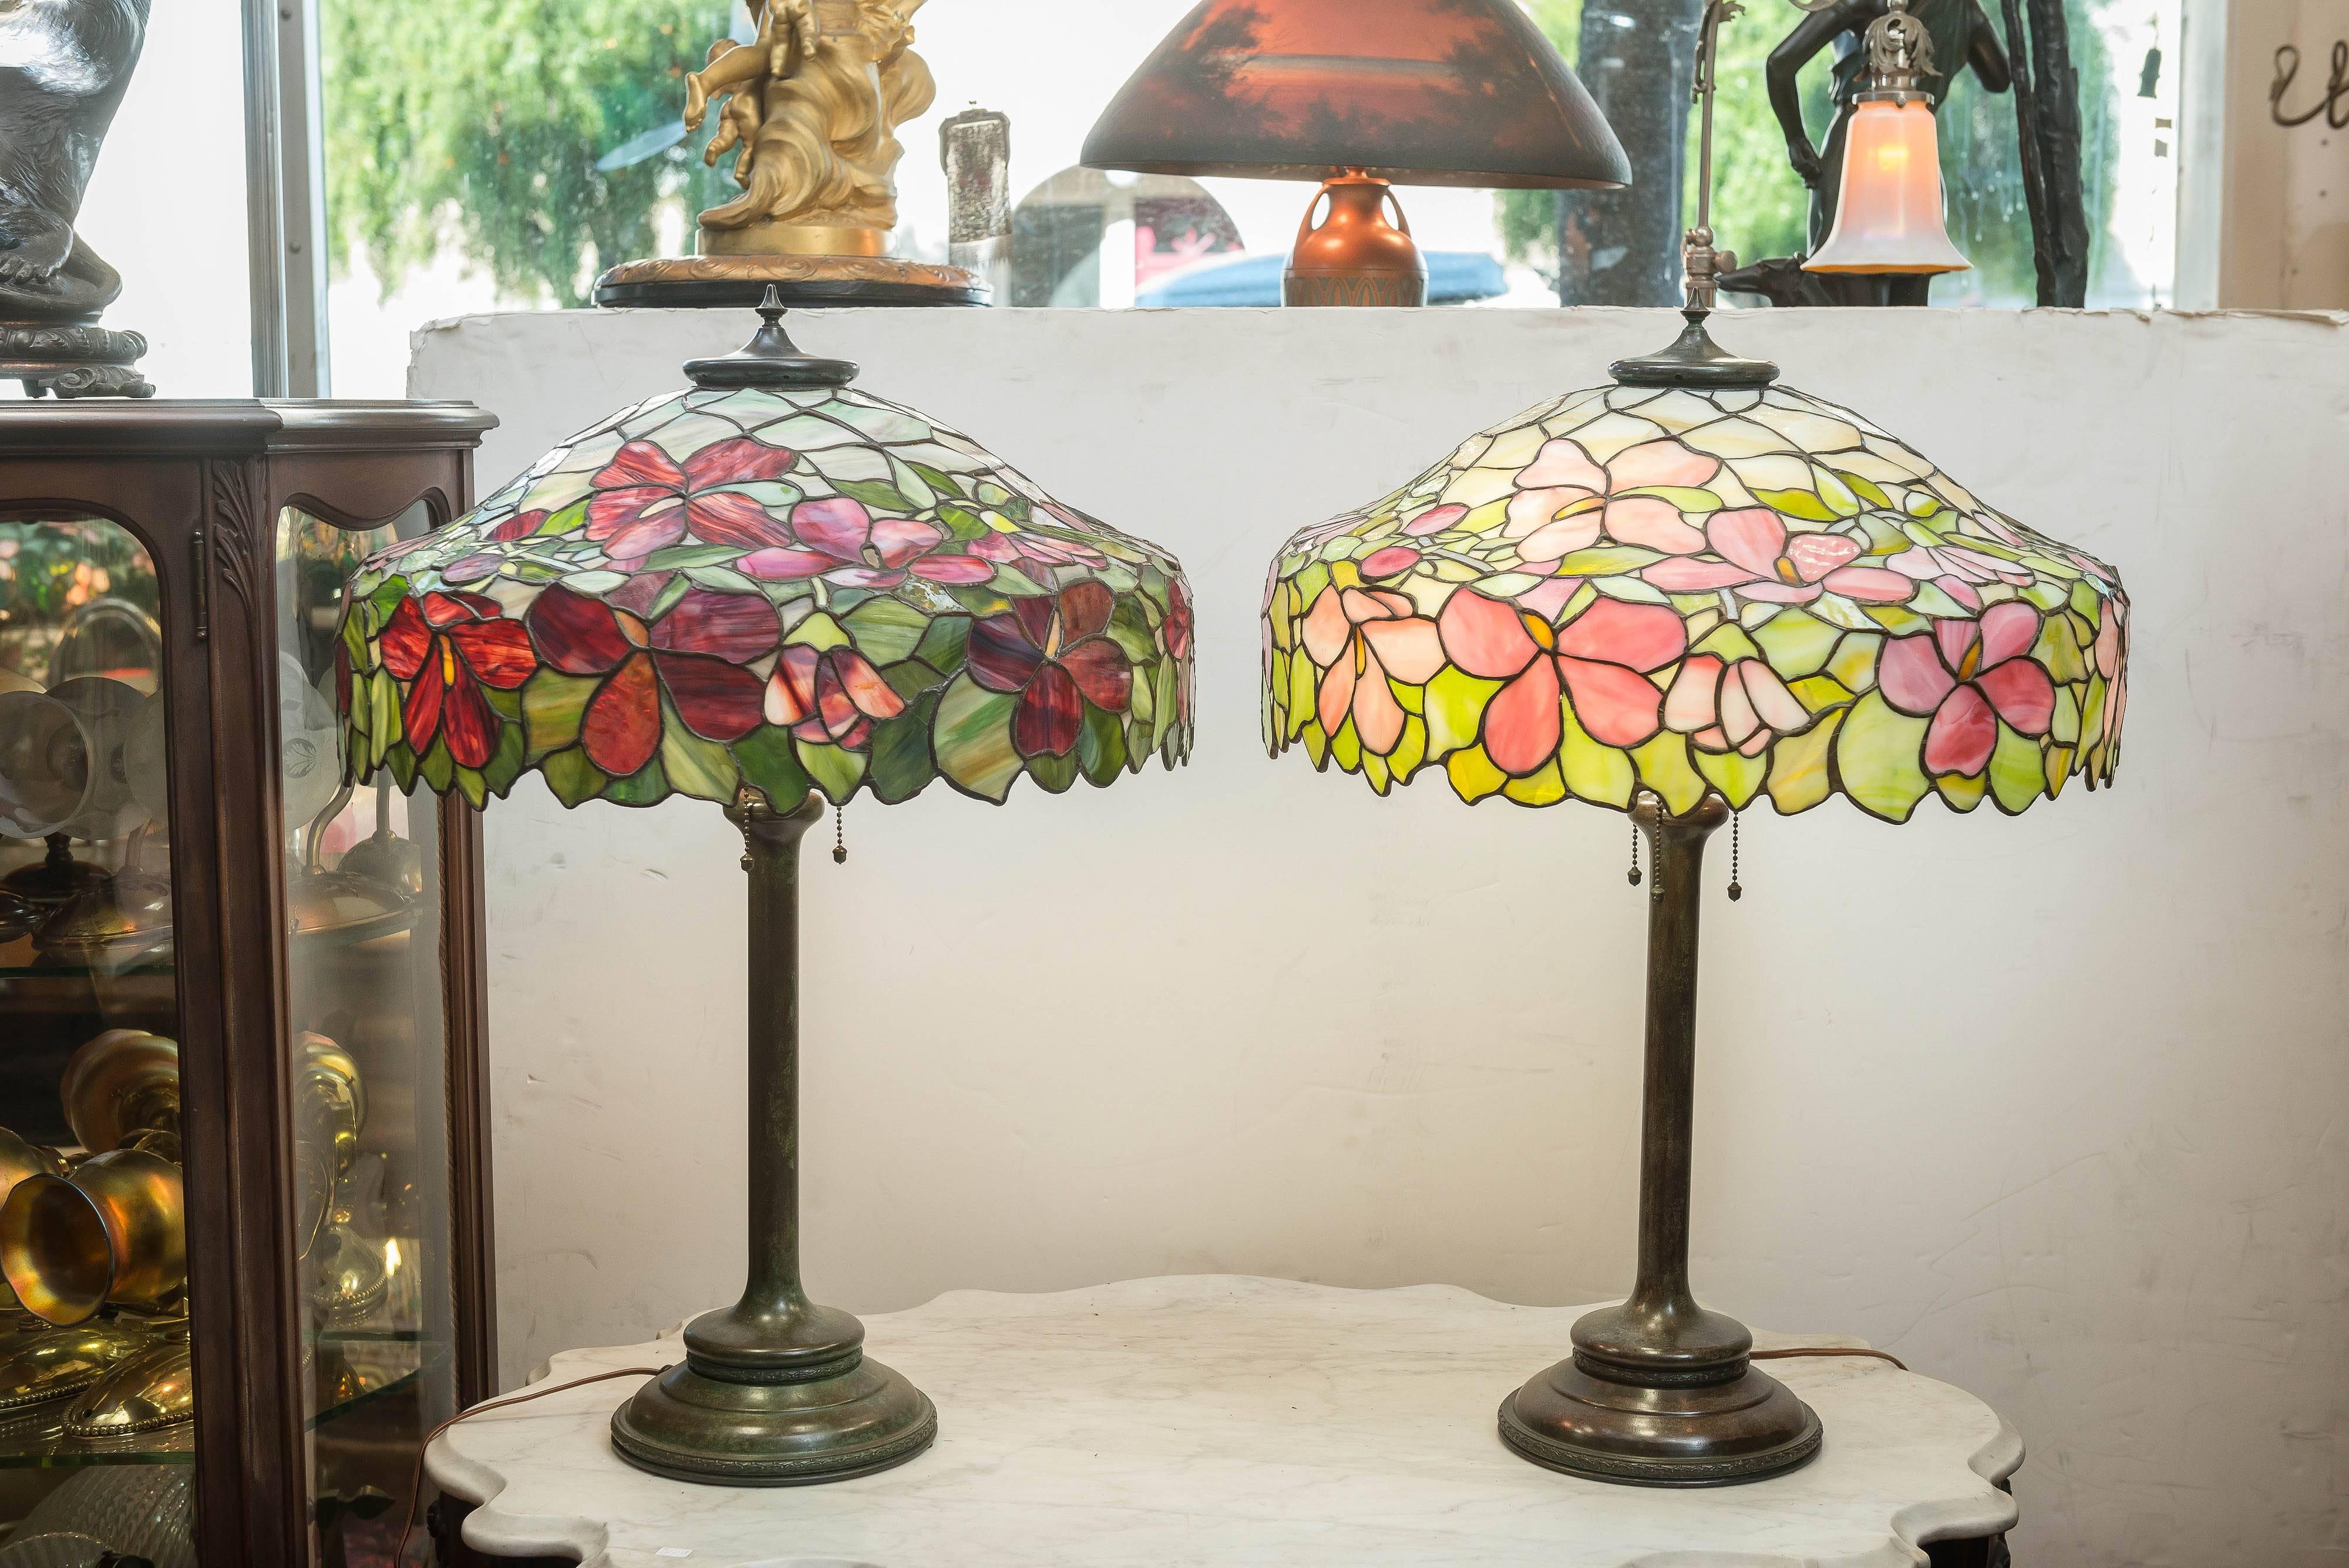 Offering a beautiful pair of lamps by a little known company to most people, but certainly well-known to the serious collector, the Unique Art Glass Co. Brooklyn N.Y.
The lamp with the red glass has some of the most dazzling glass you will see on